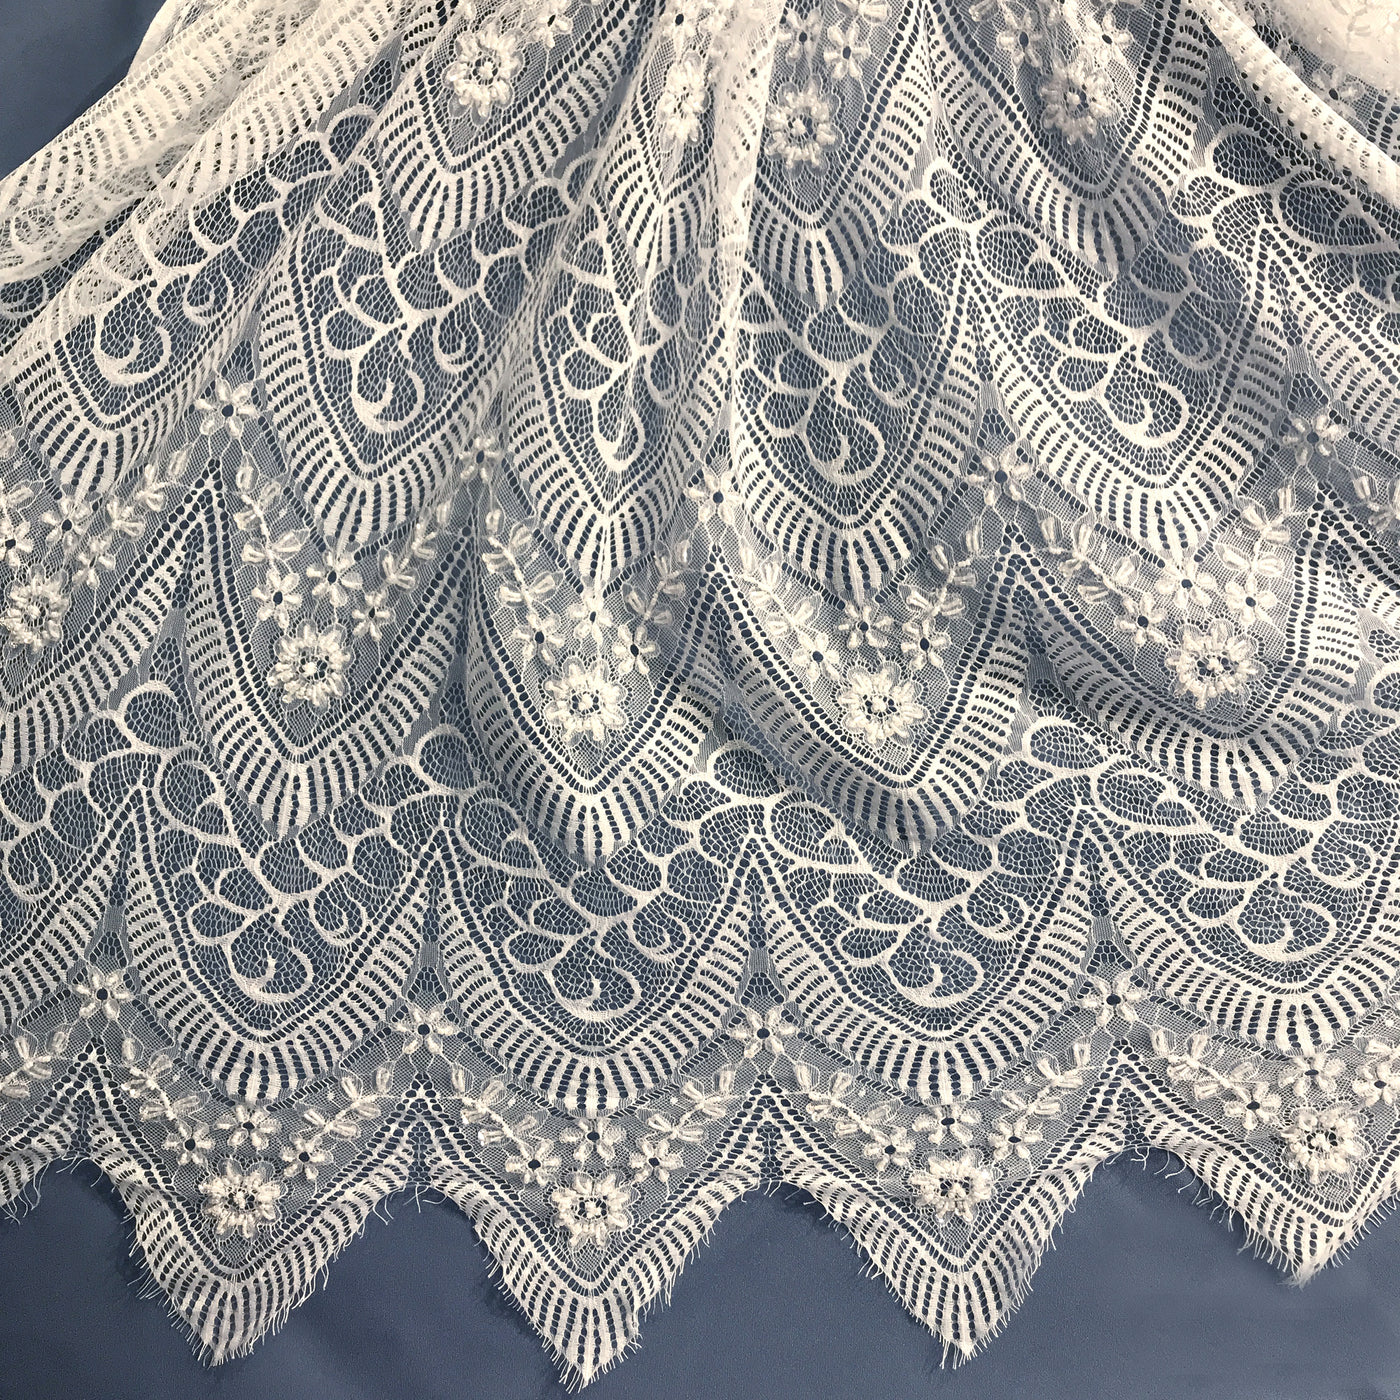 Beaded Chantilly Embroidered Lace Fabric with Eyelash Scallop | Lace USA - 68137W-BP